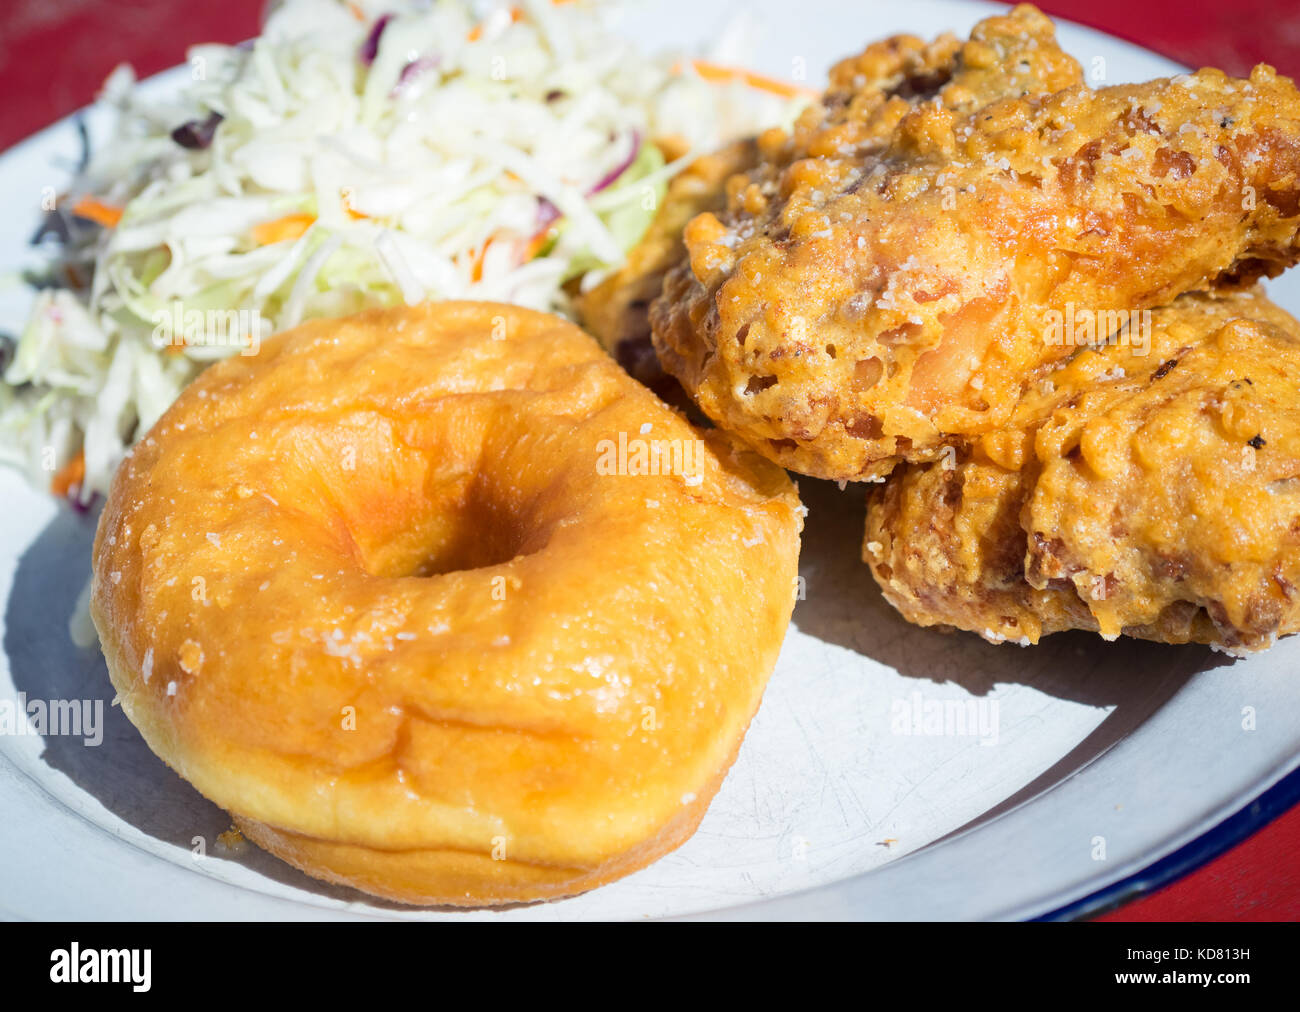 Fried chicken and donuts (fried chicken and donut) from Have Mercy, a popular US southern food restaurant in Edmonton, Alberta, Canada. Stock Photo